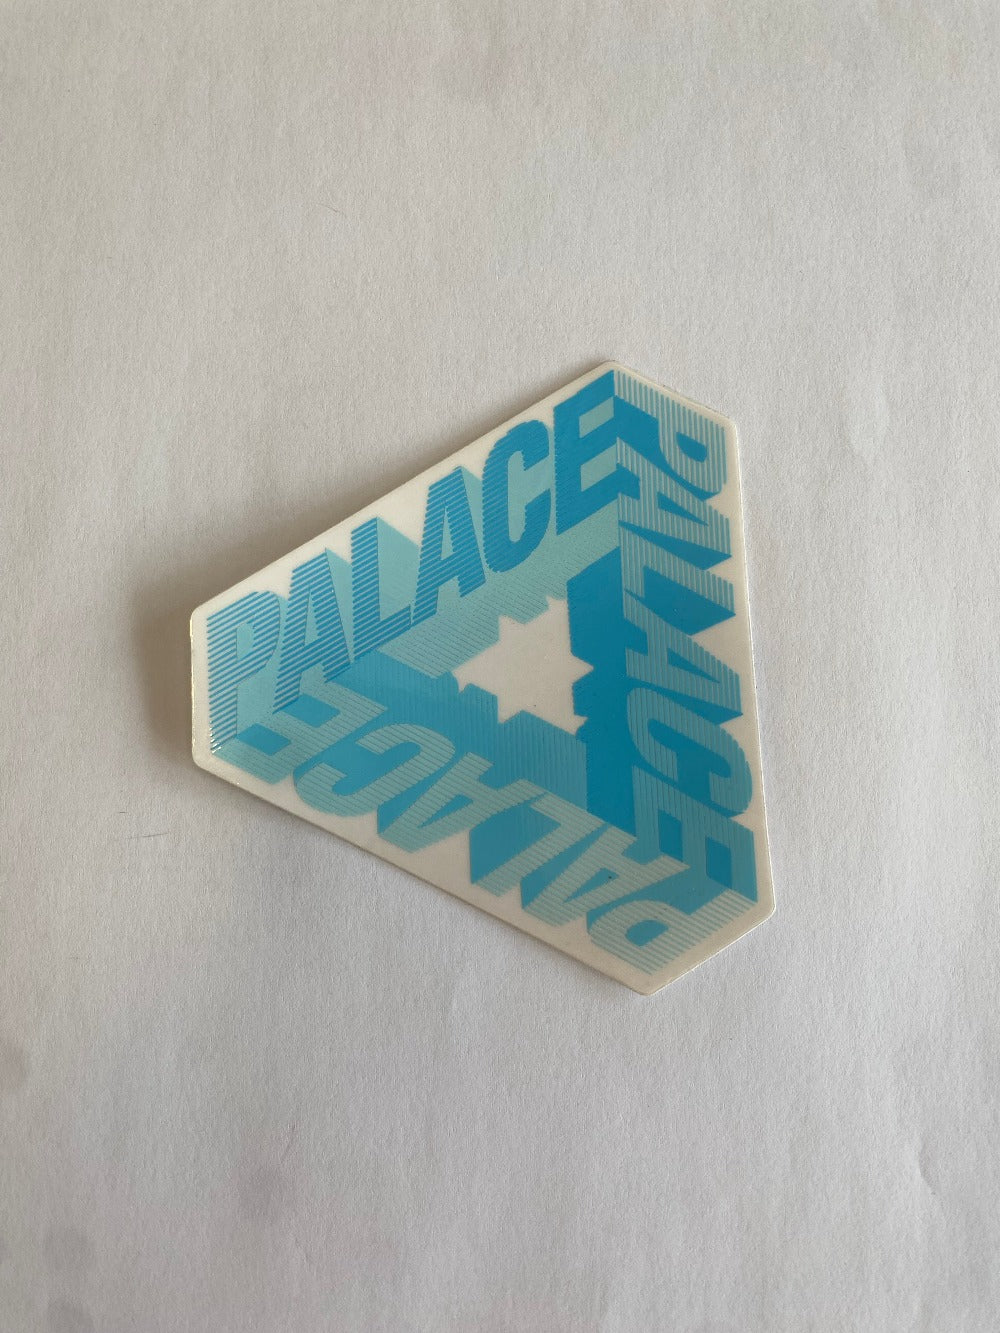 Palace Triferg Blue 3D | Hype Vault Kuala Lumpur | Asia's Top Trusted High-End Sneakers and Streetwear Store